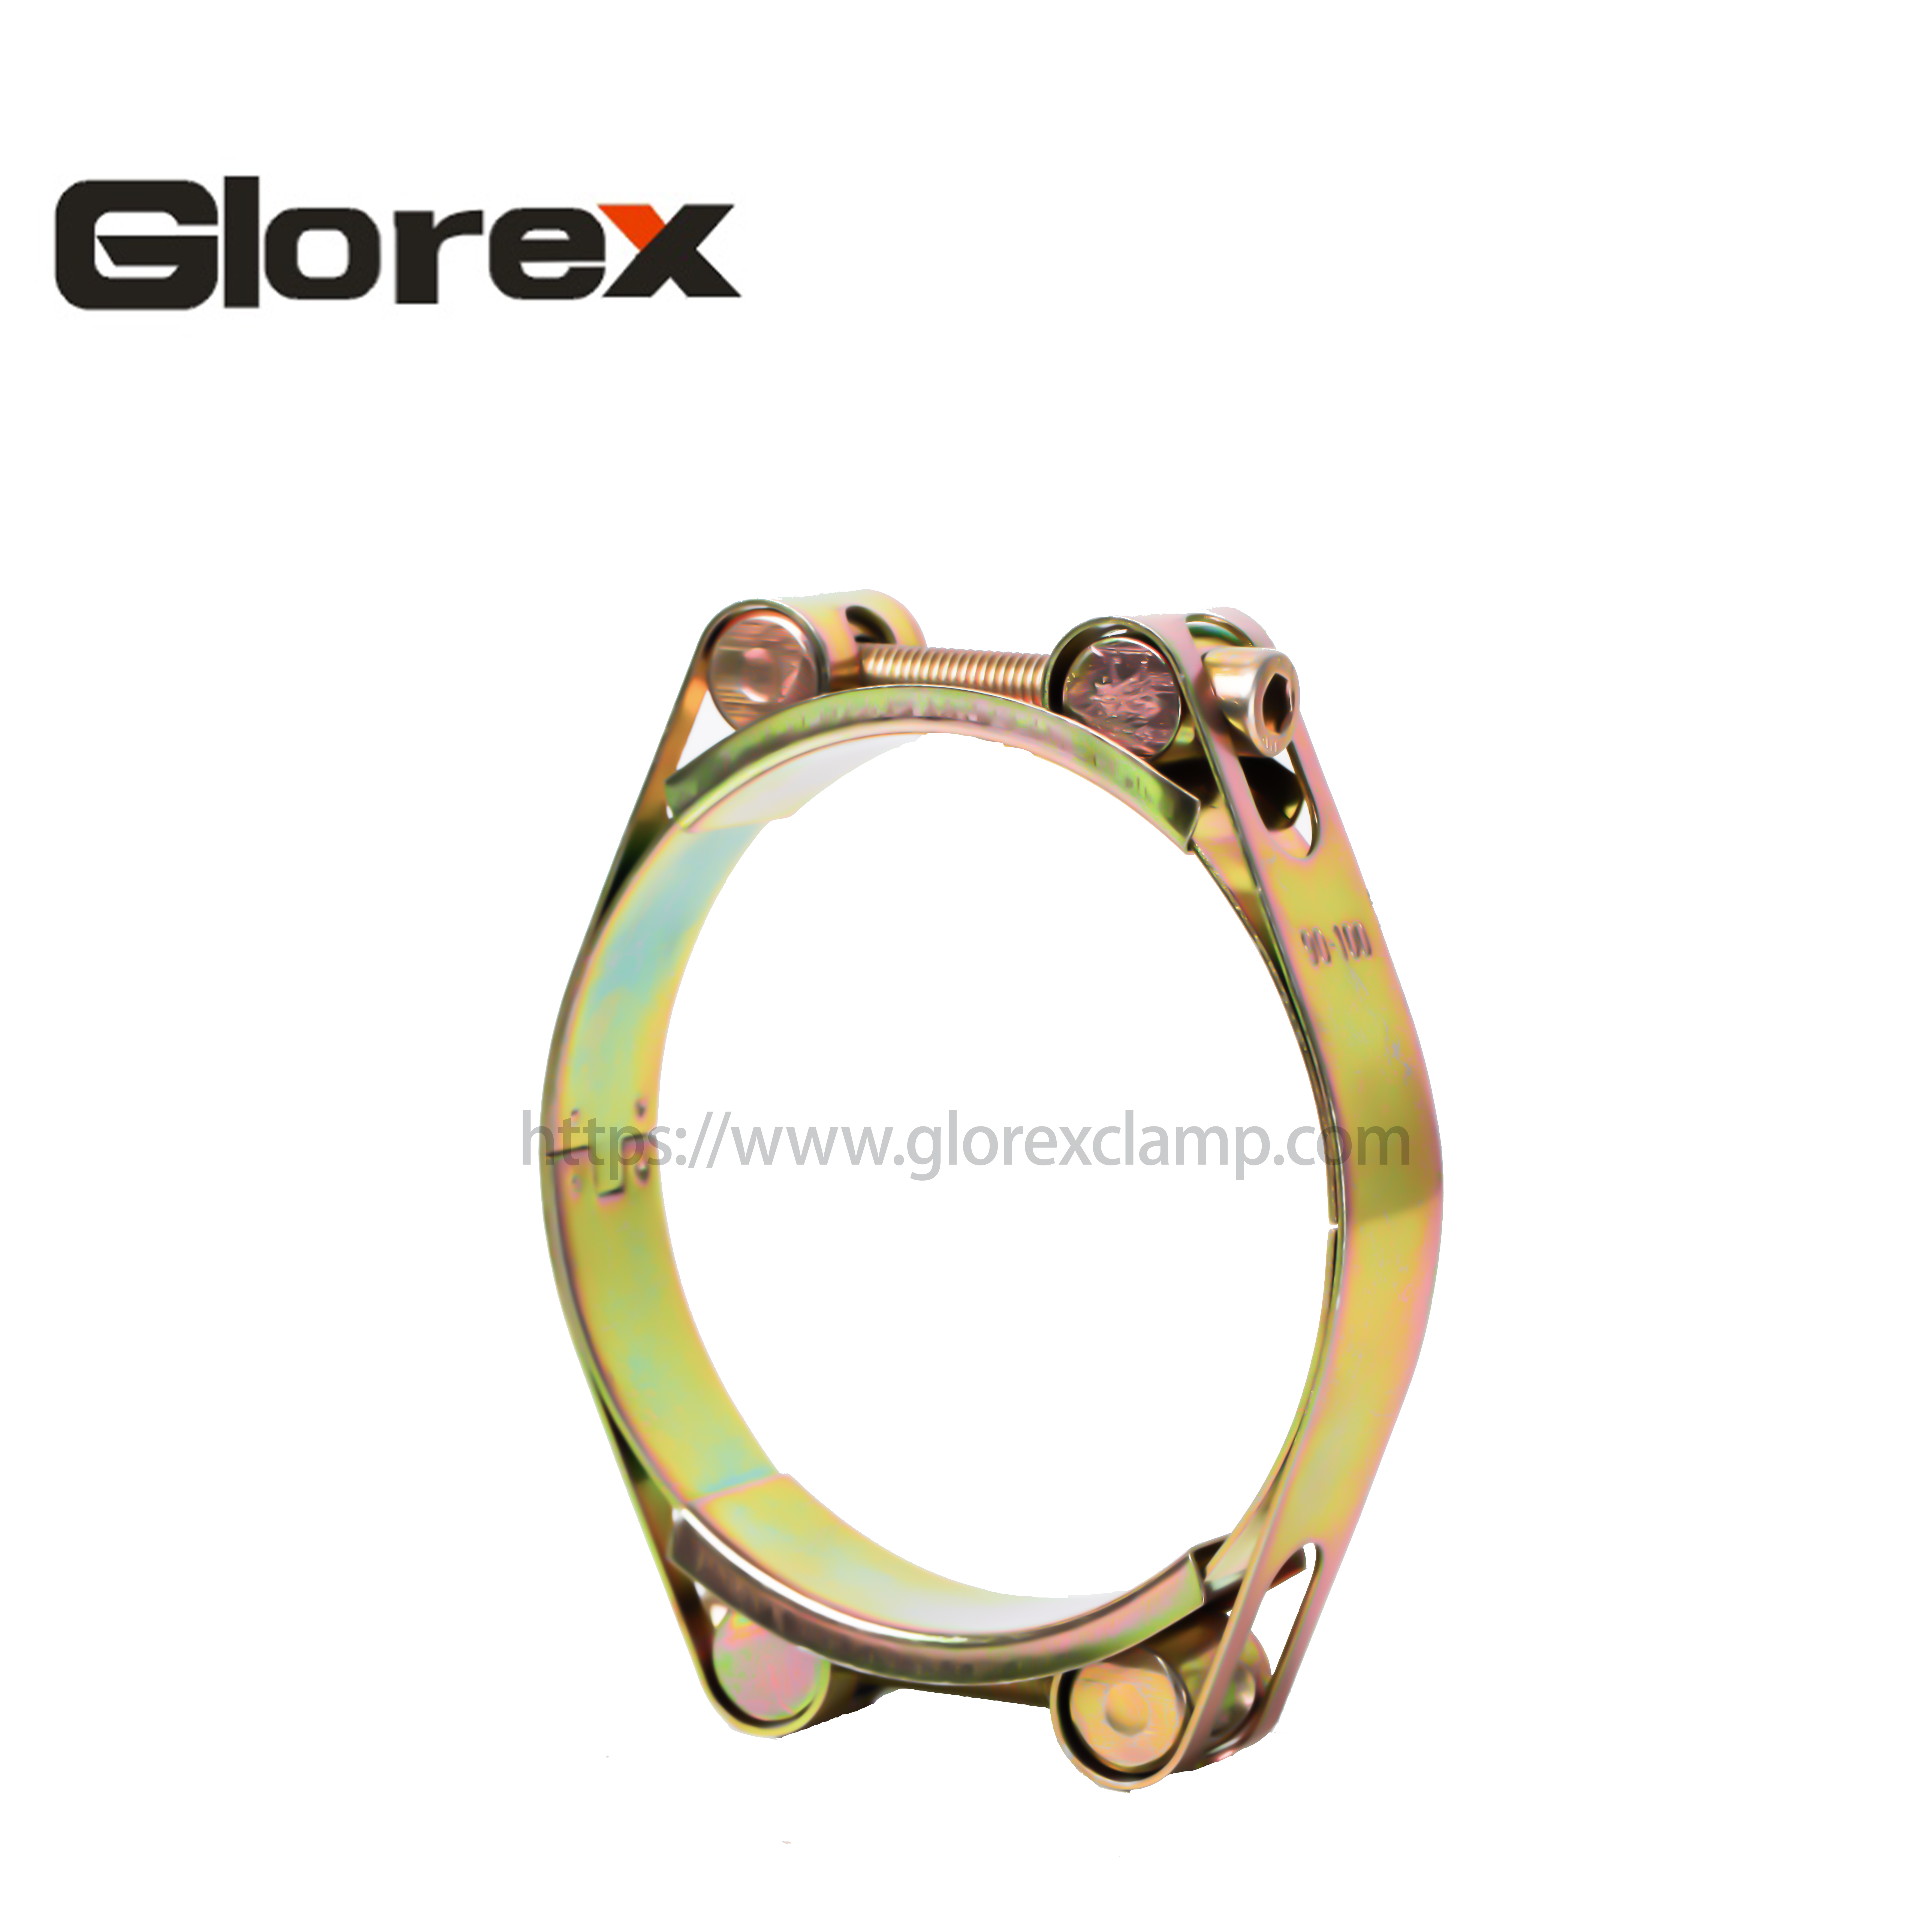 Wholesale Price China Fuel Line Hose Clamp - Robust clamp with double bolts – Glorex Featured Image